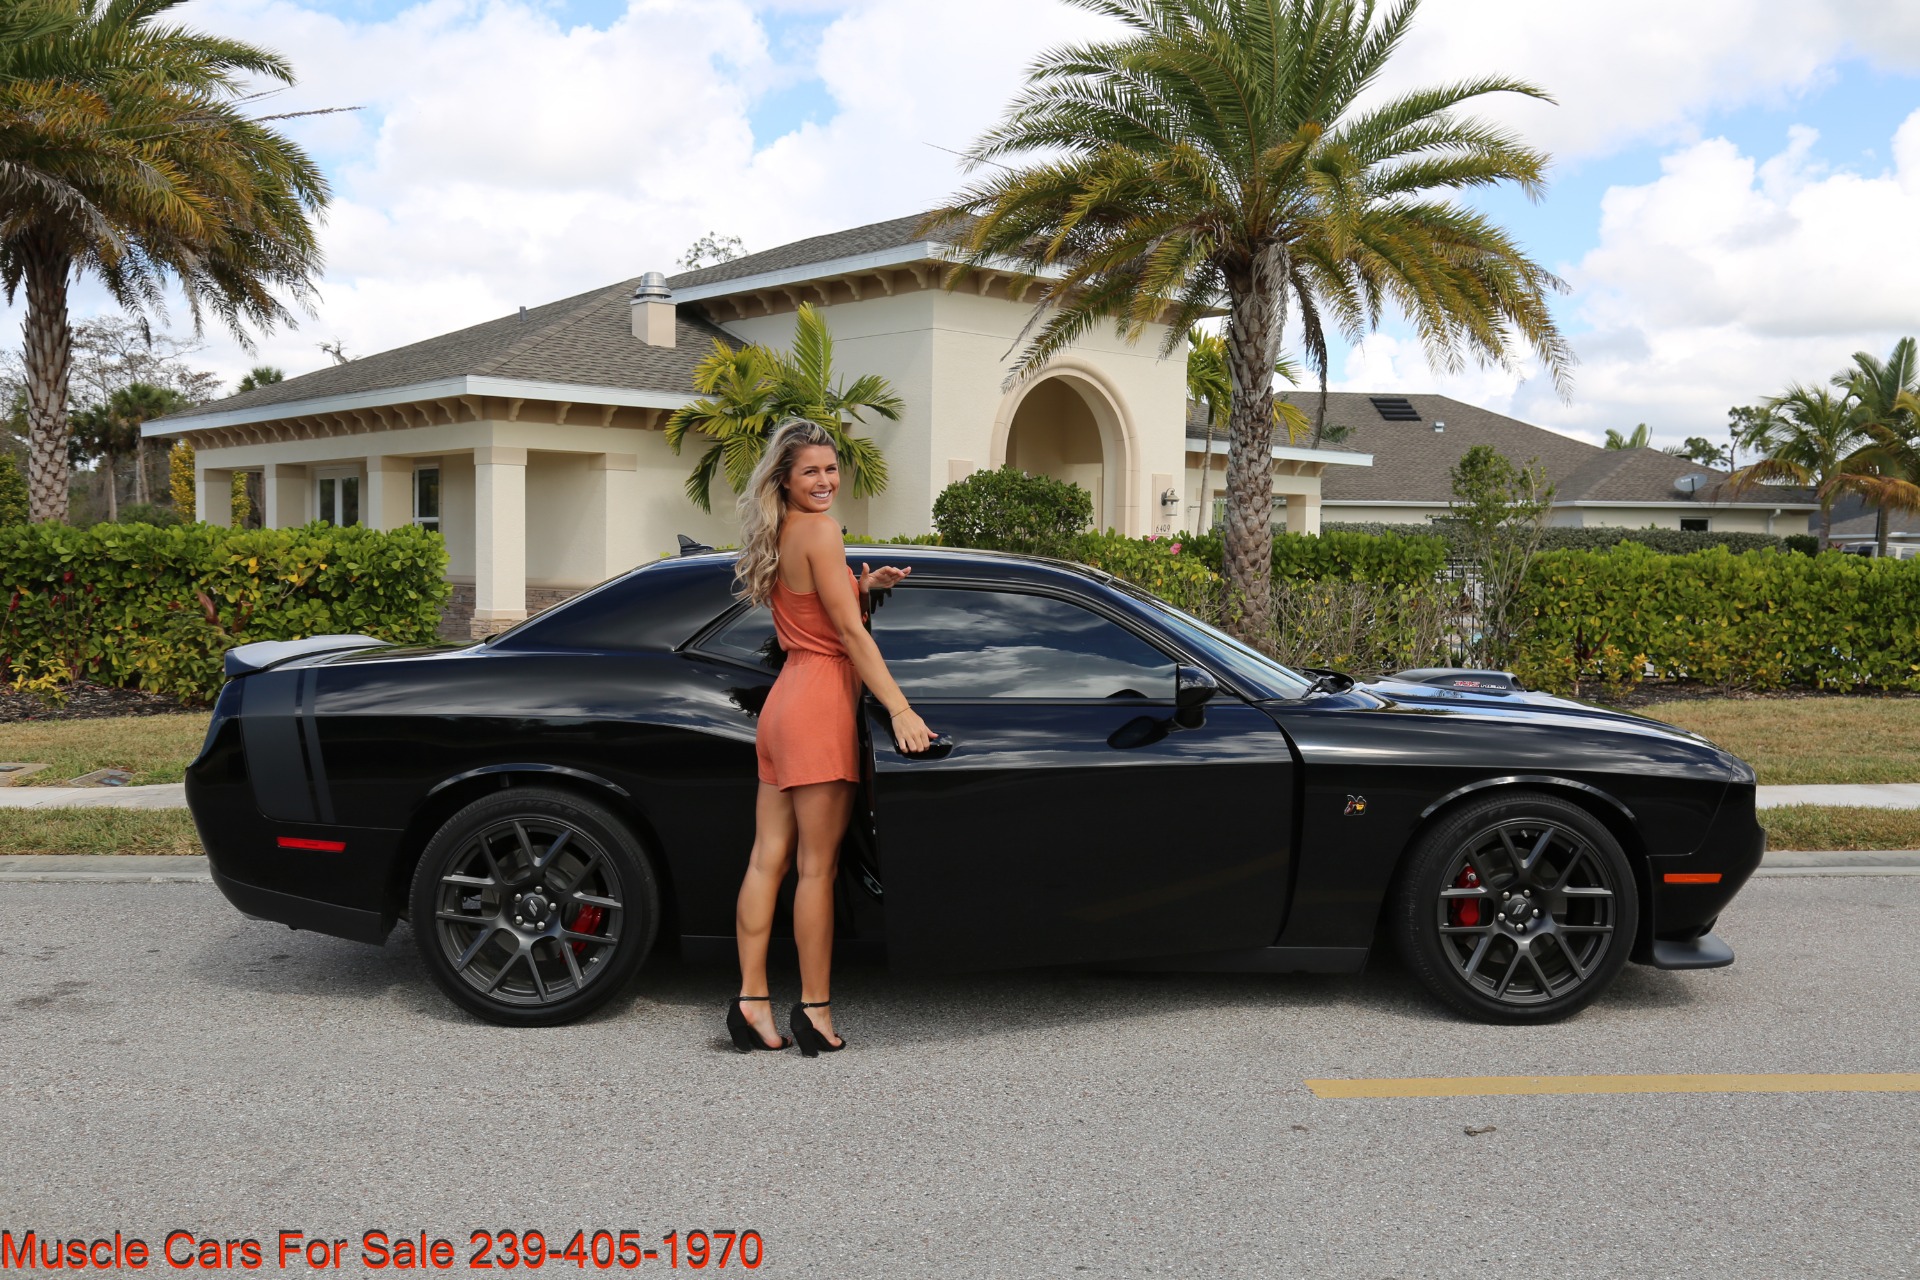 Used 2017 Dodge Challenger 392 HEMI Scat Pack Shaker for sale Sold at Muscle Cars for Sale Inc. in Fort Myers FL 33912 2